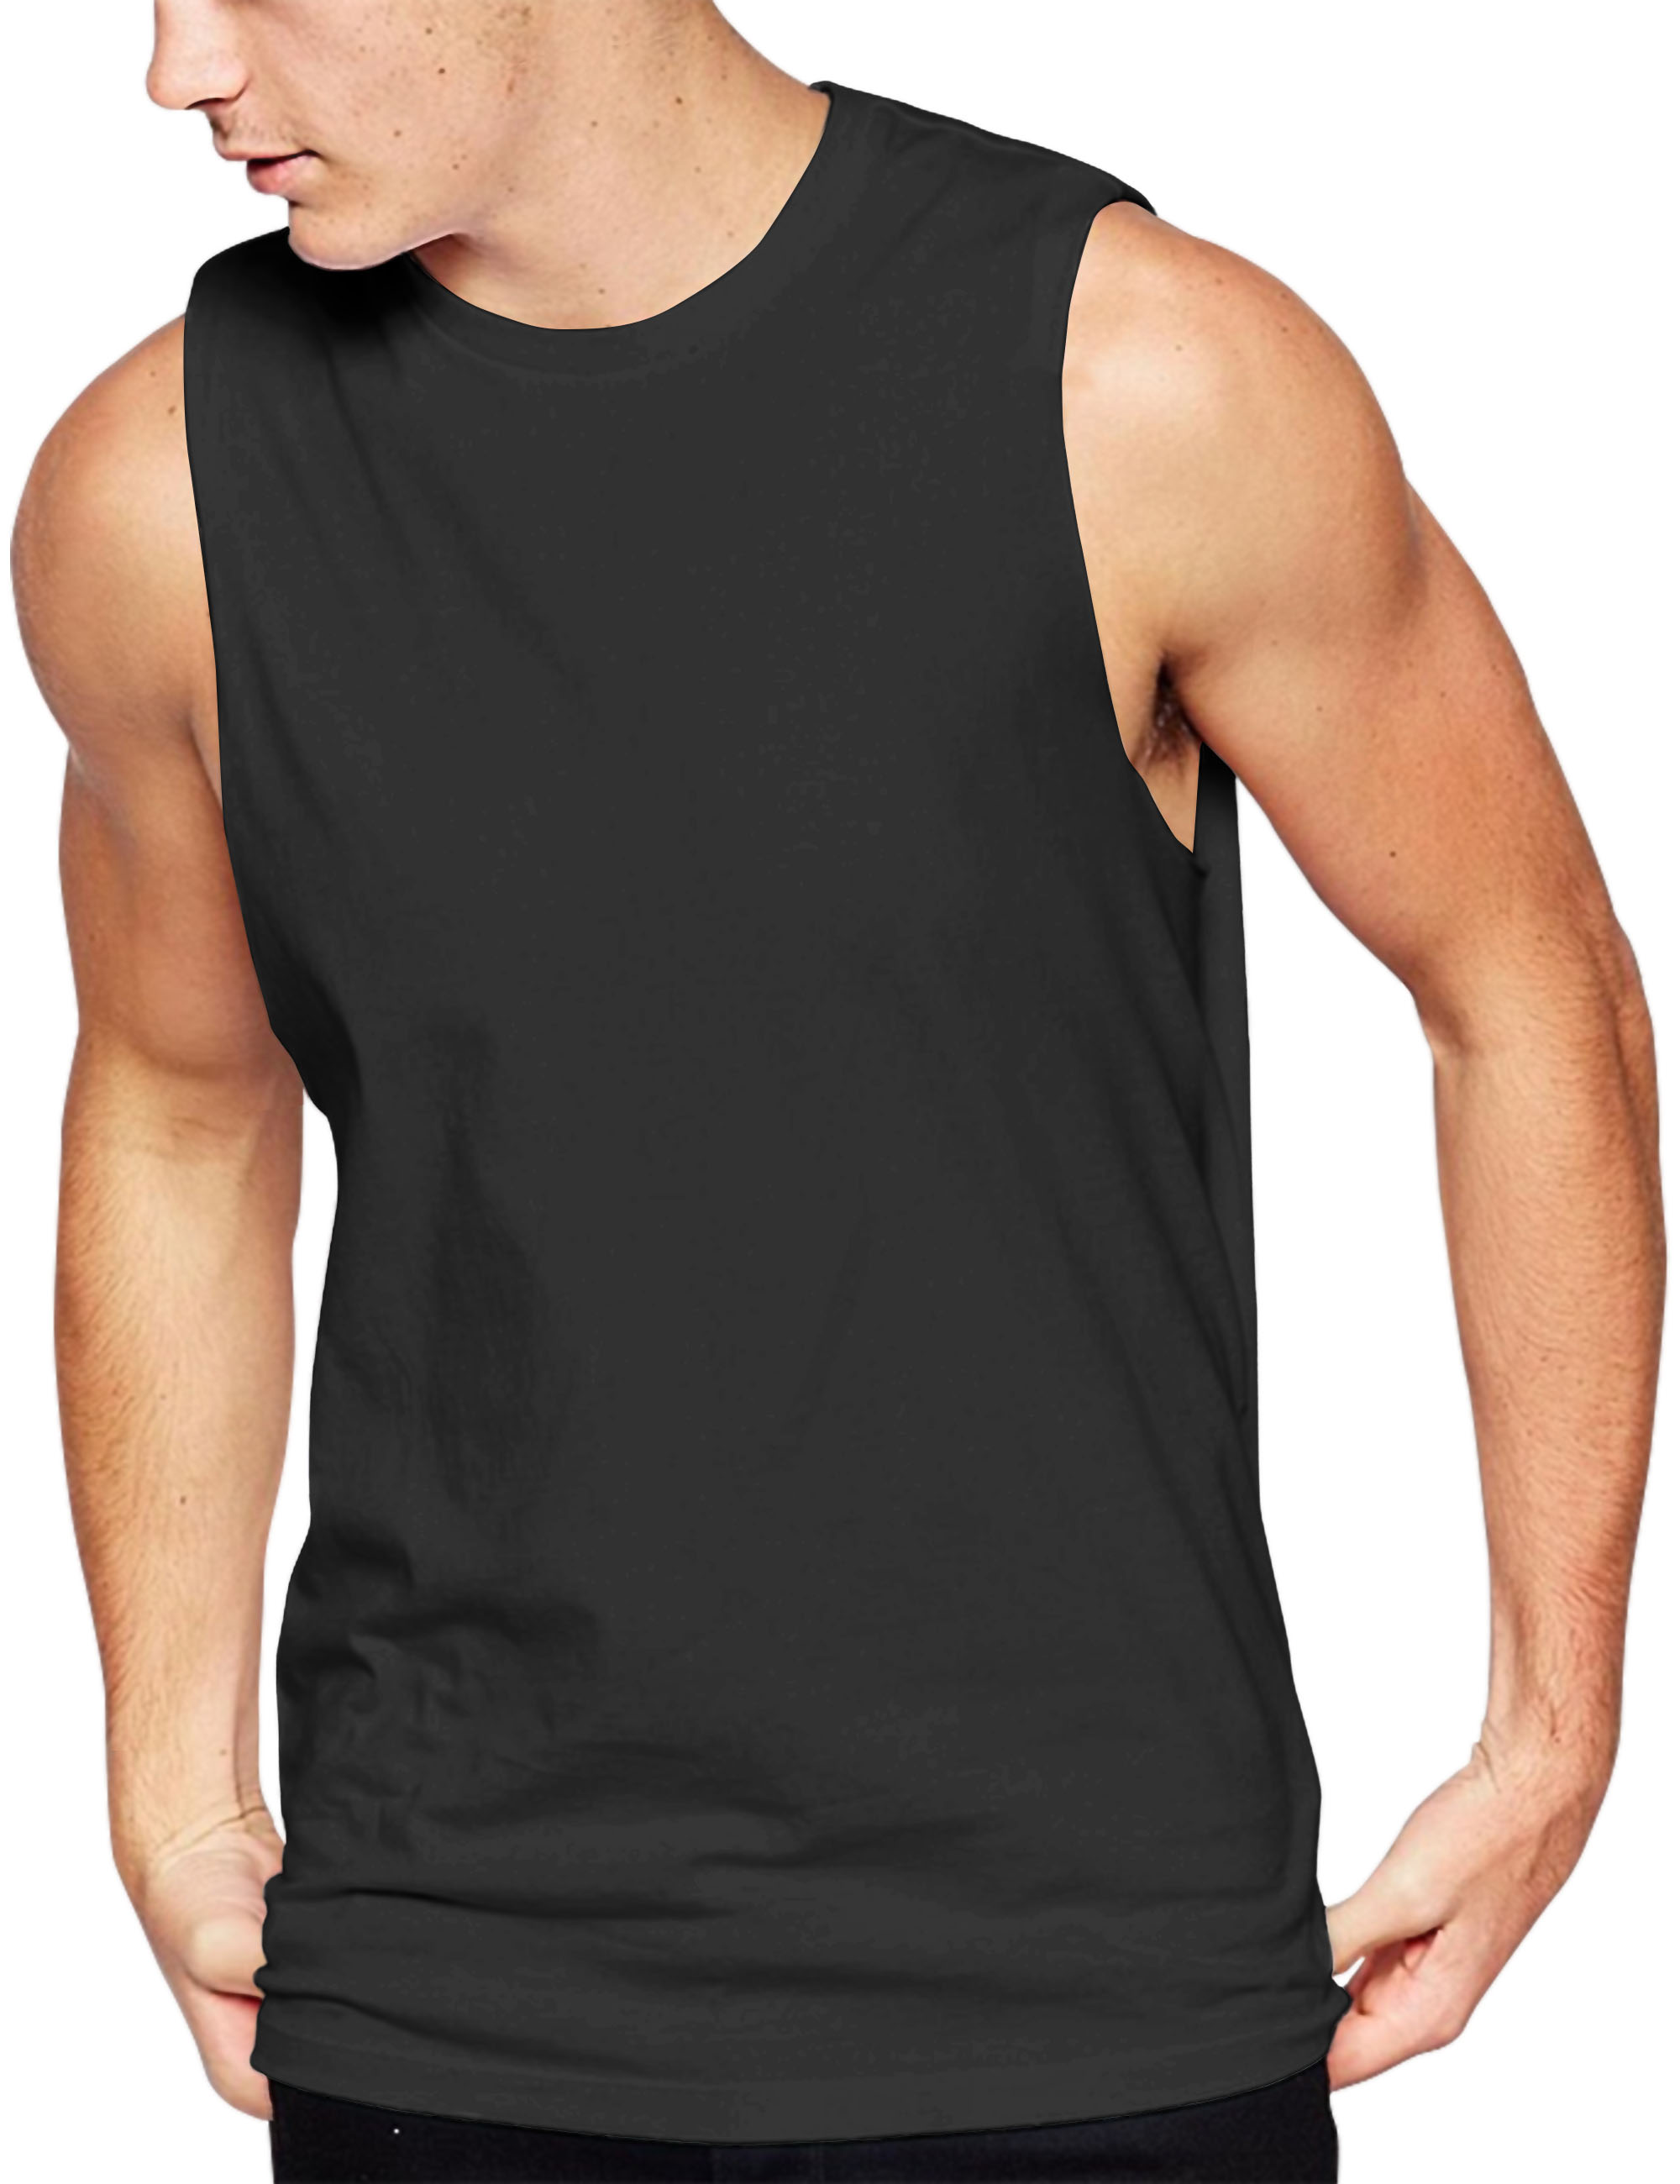 Hat and Beyond Men's Muscle Gym Tank Top Sleeveless T-Shirts - image 1 of 5